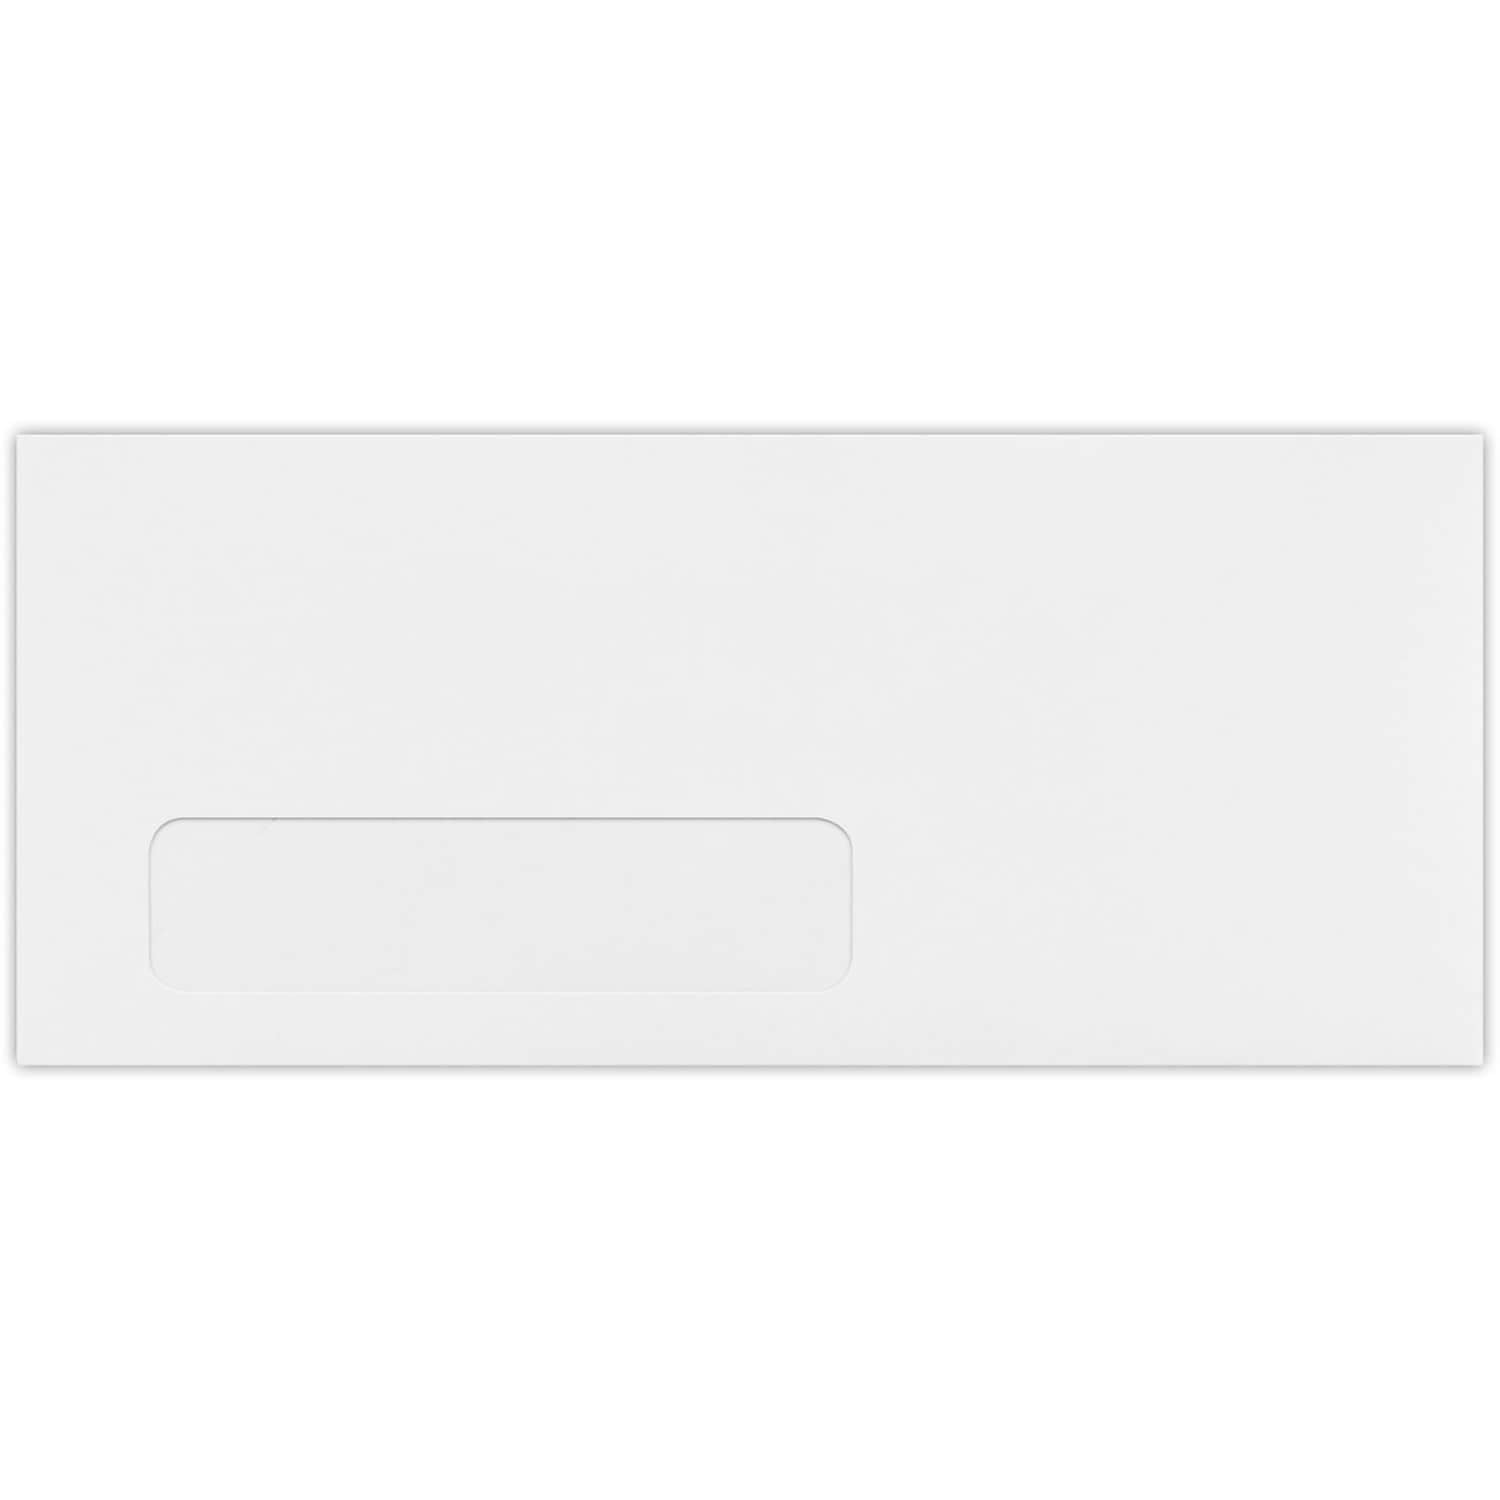 White 28lb | Perfect for Sending Letters Invoices or Statements 1590PS-50 50 Qty. 9 x 12 Open End Window Envelopes w/Peel & Seel 